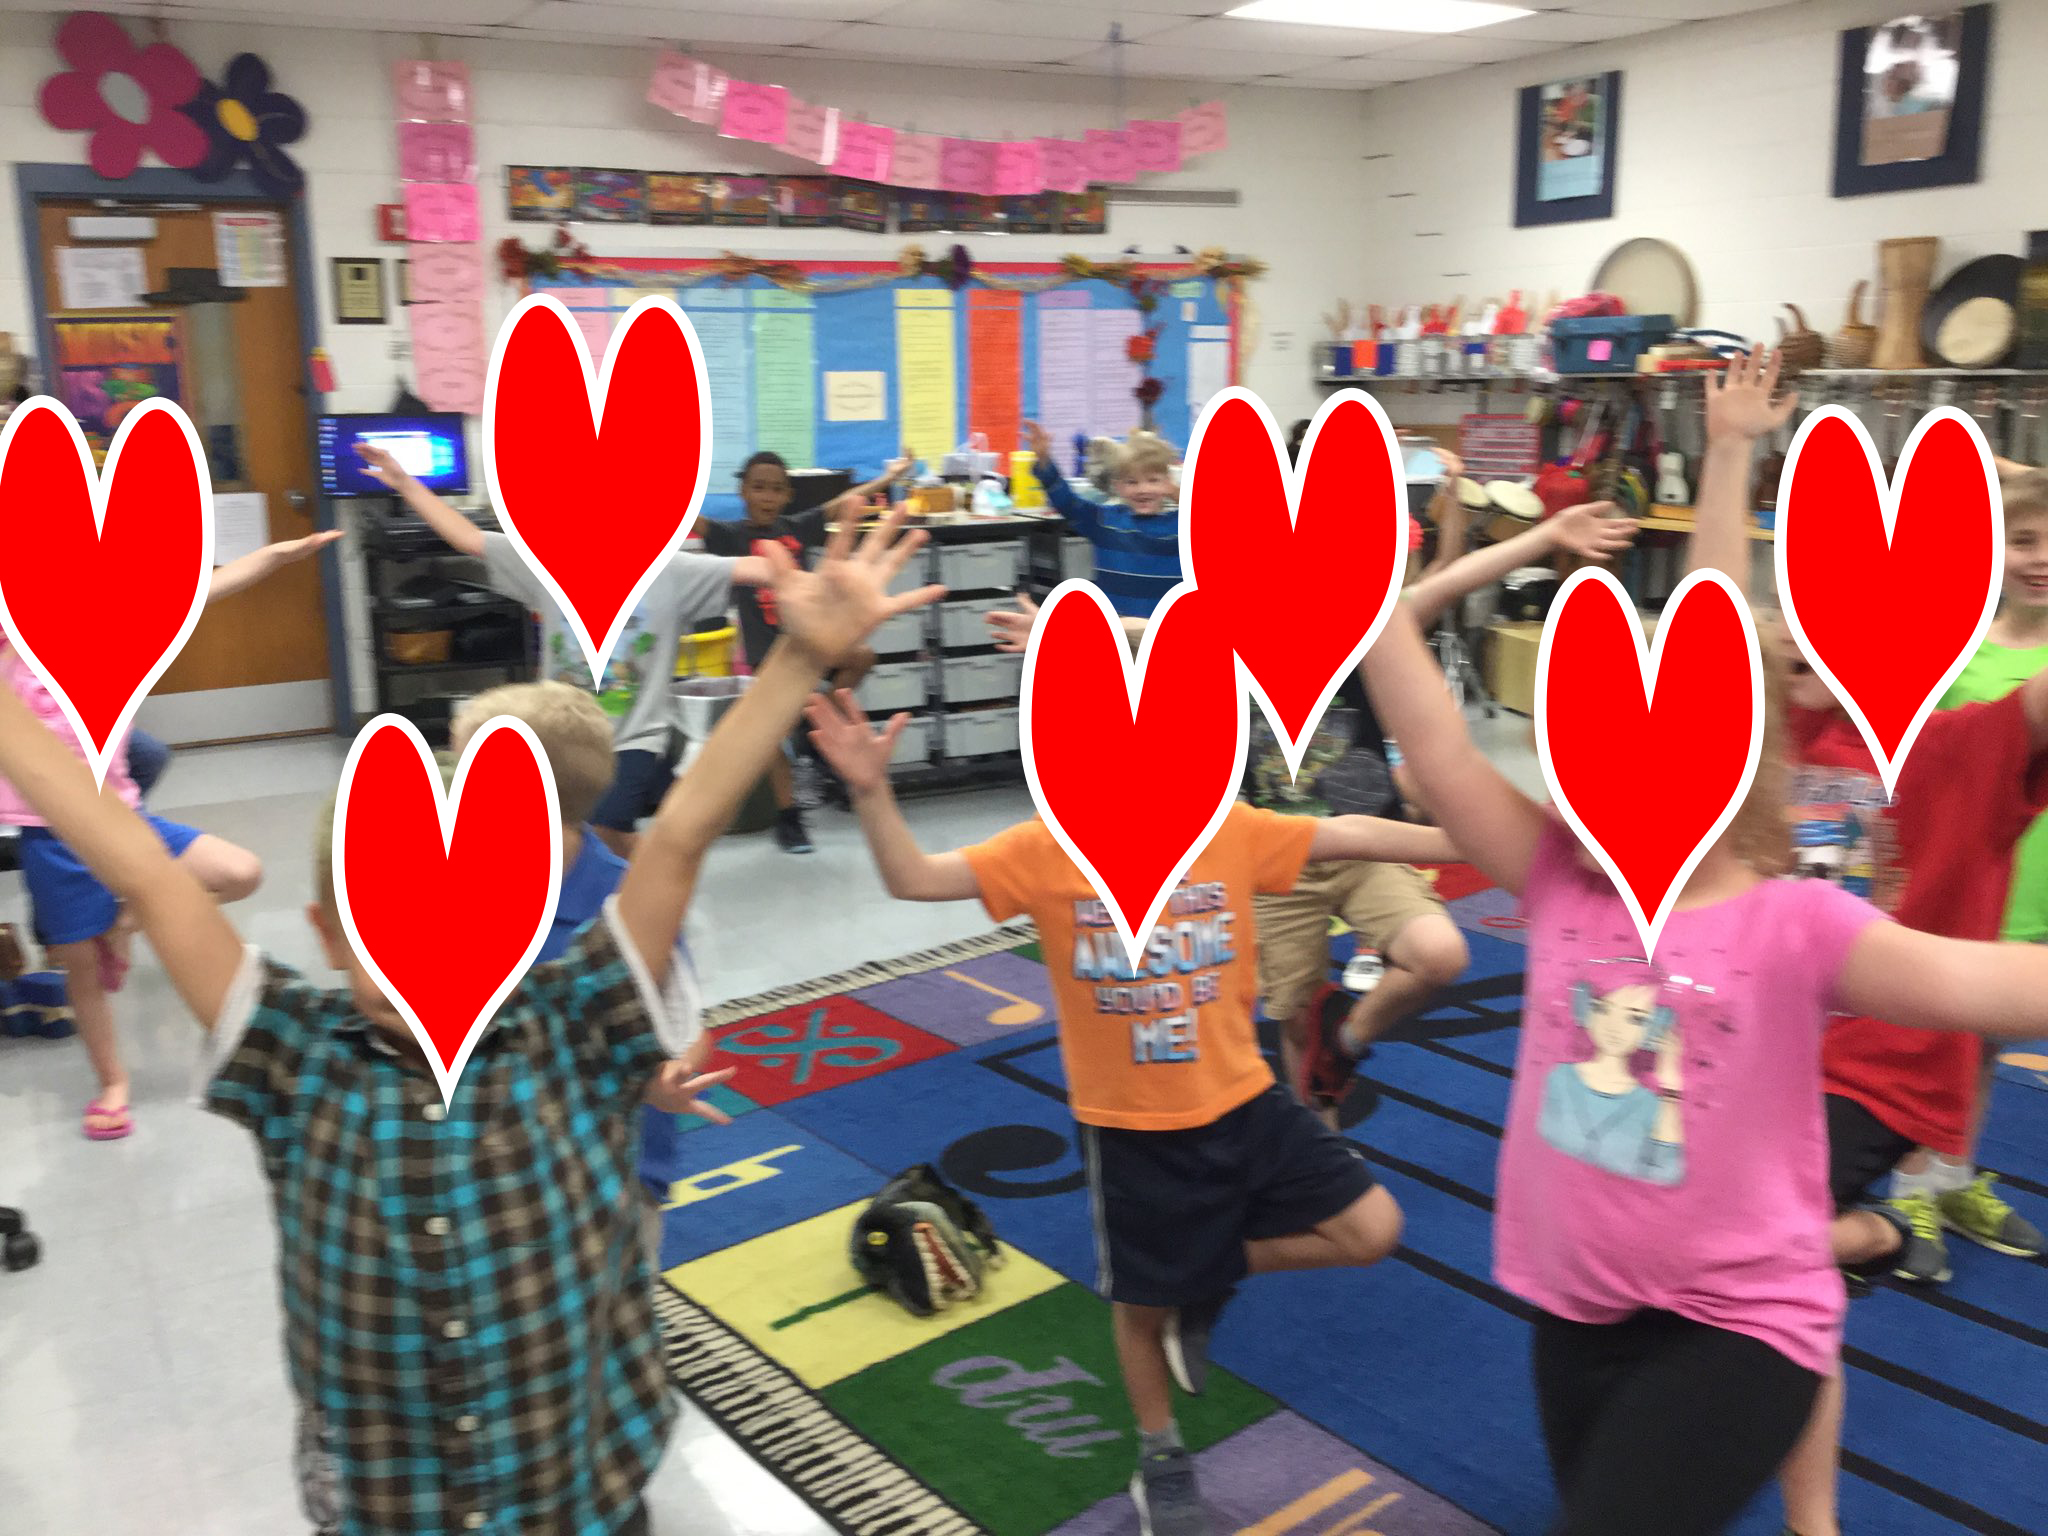 First grade students doing yoga poses from Yoga Pretzels pose cards